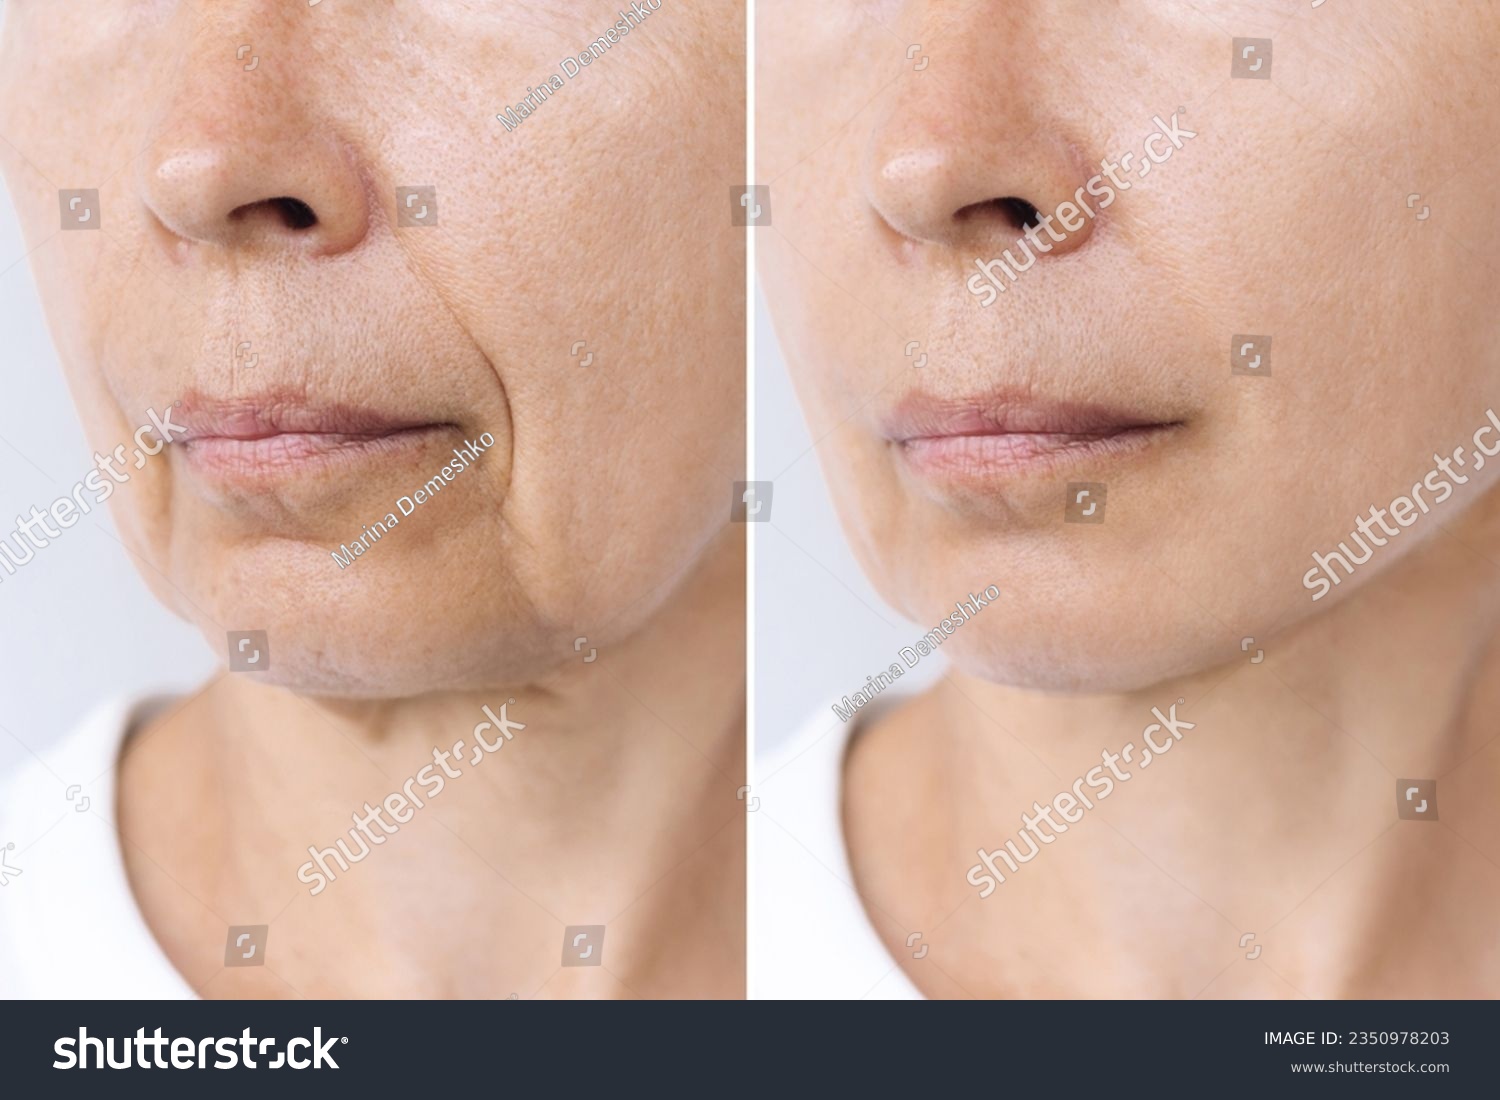 Lower part of elderly woman's face and neck with signs of skin aging before after facelift, plastic surgery. Age-related changes, flabby sagging skin, wrinkles, creases. Rejuvenating procedures #2350978203